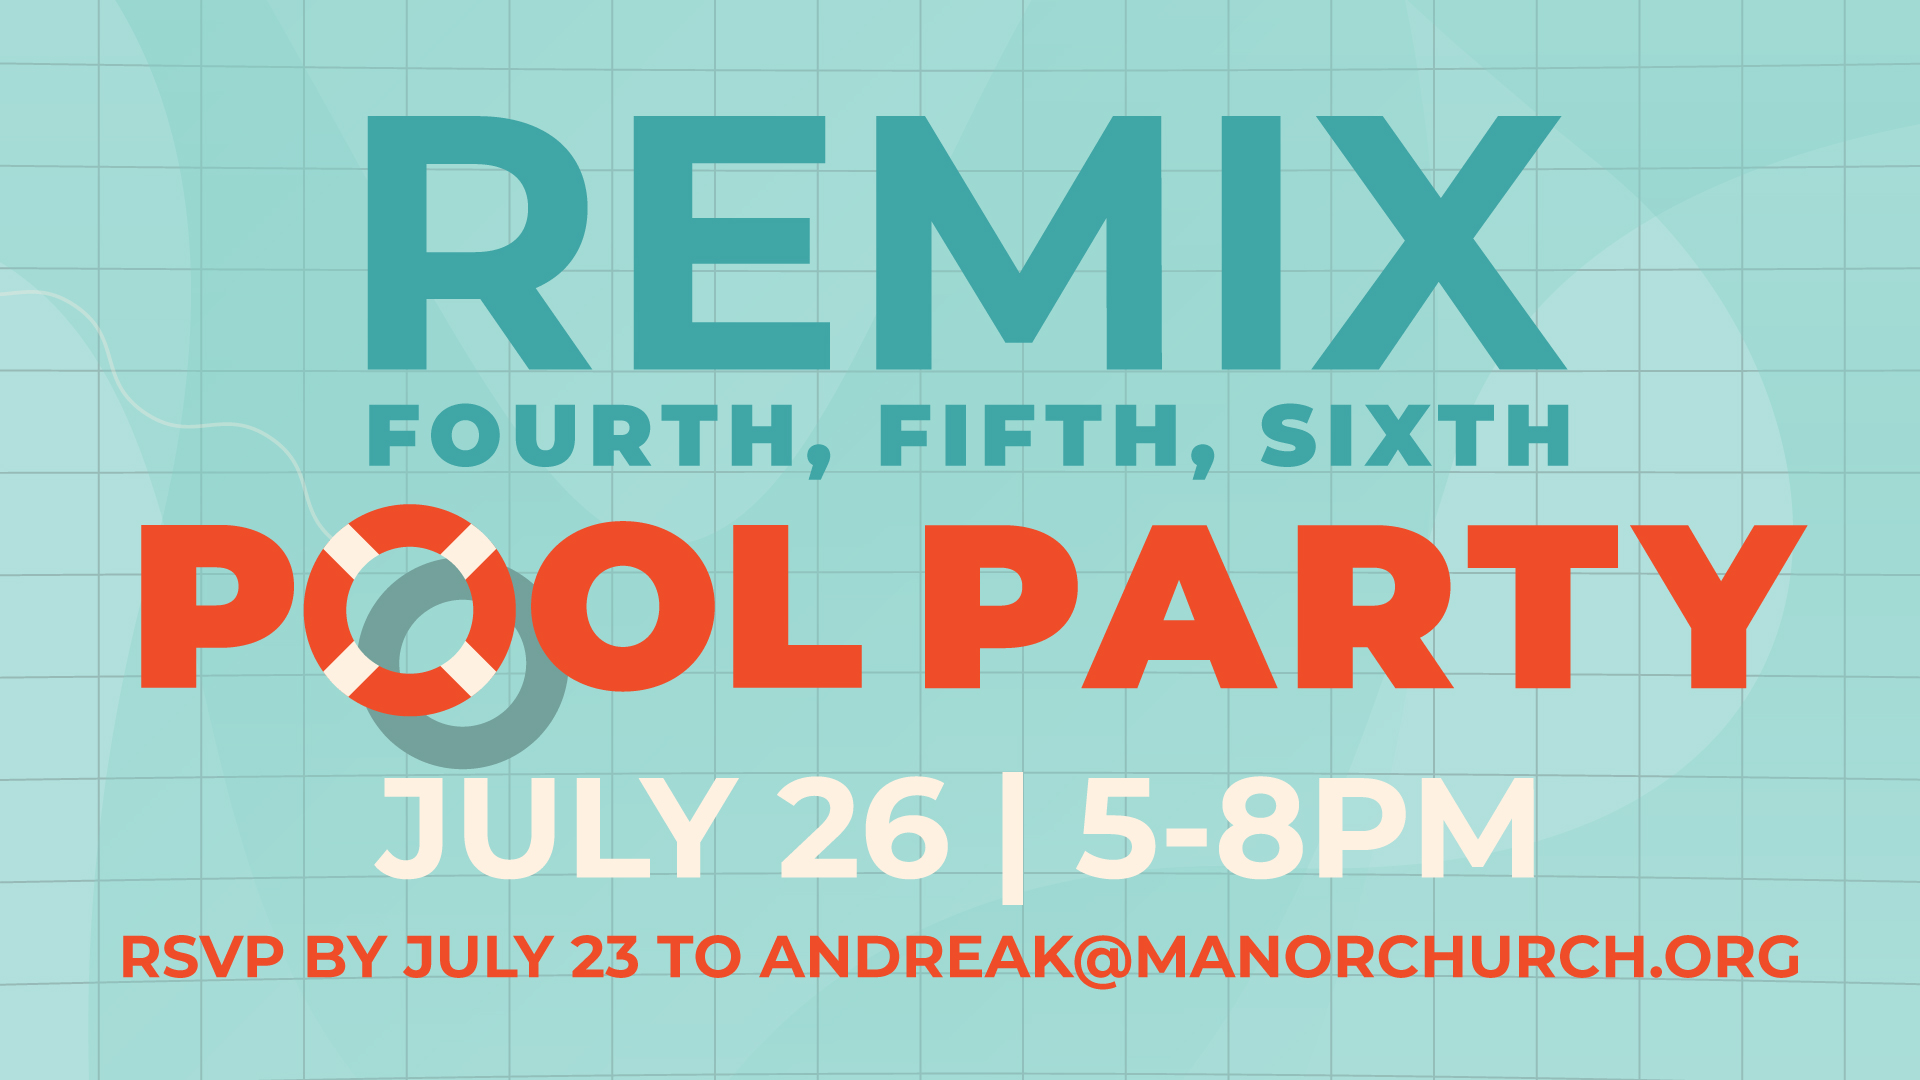 REMIX: 4th, 5th, 6th | Pool Party. July 26 from 5-8PM. RSVP by July 23 to andreak@manorchurch.org